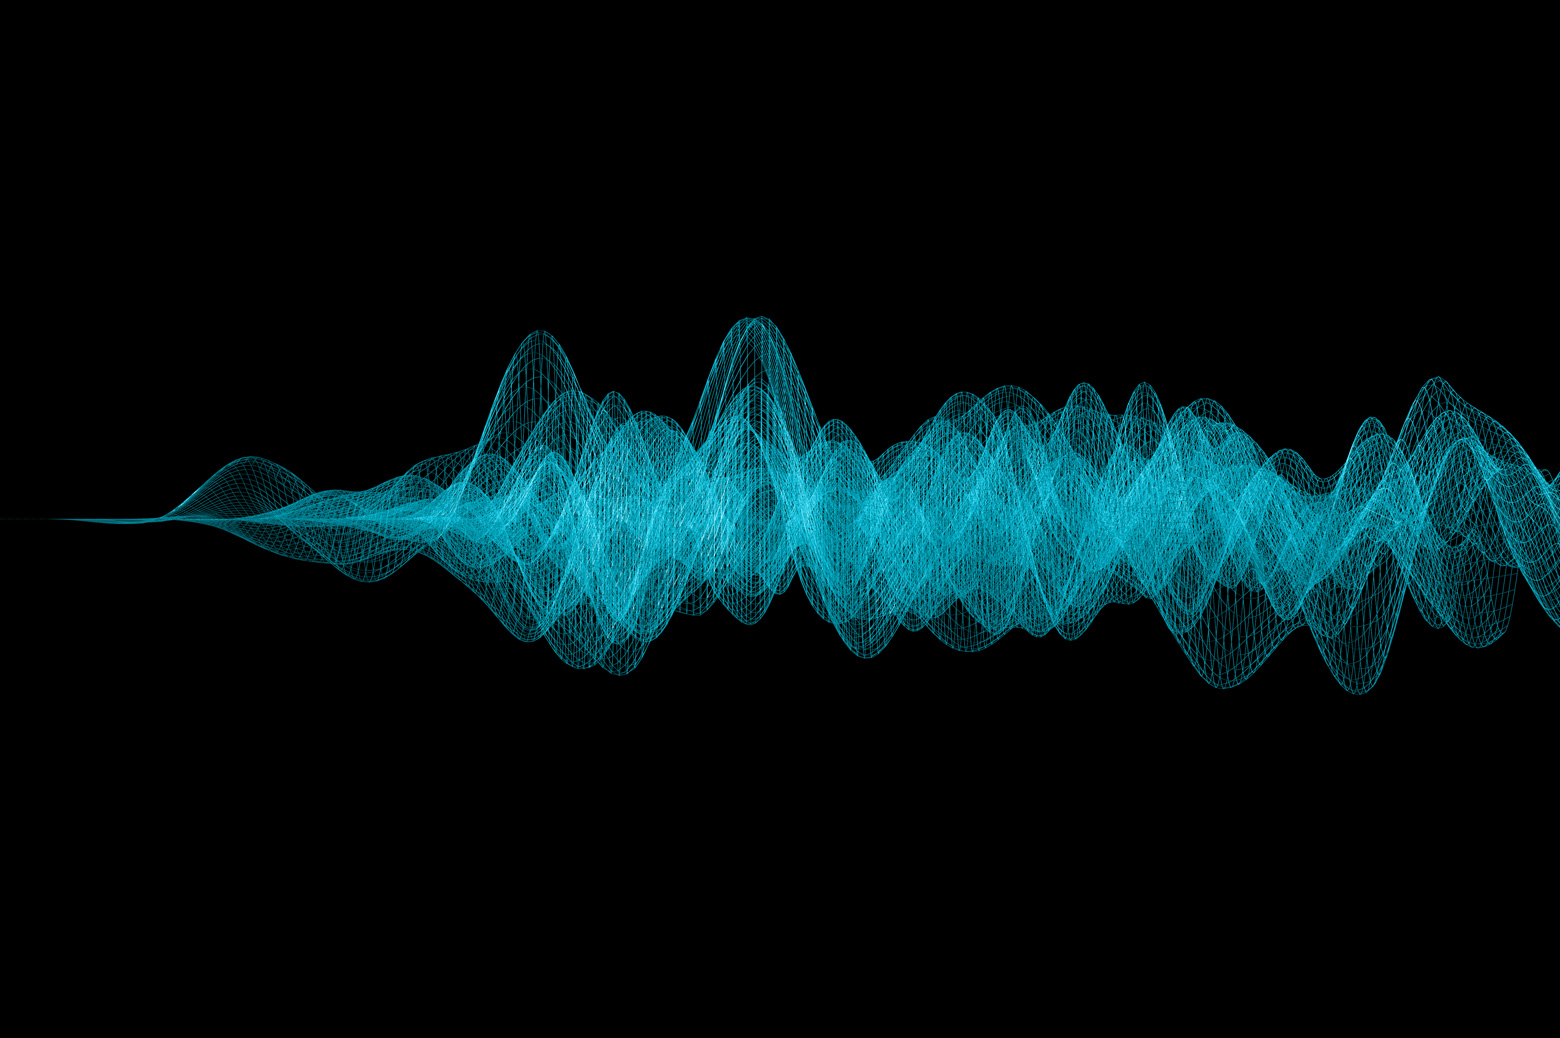 Sound is a vibration that typically propagates as an audible wave of pressure.